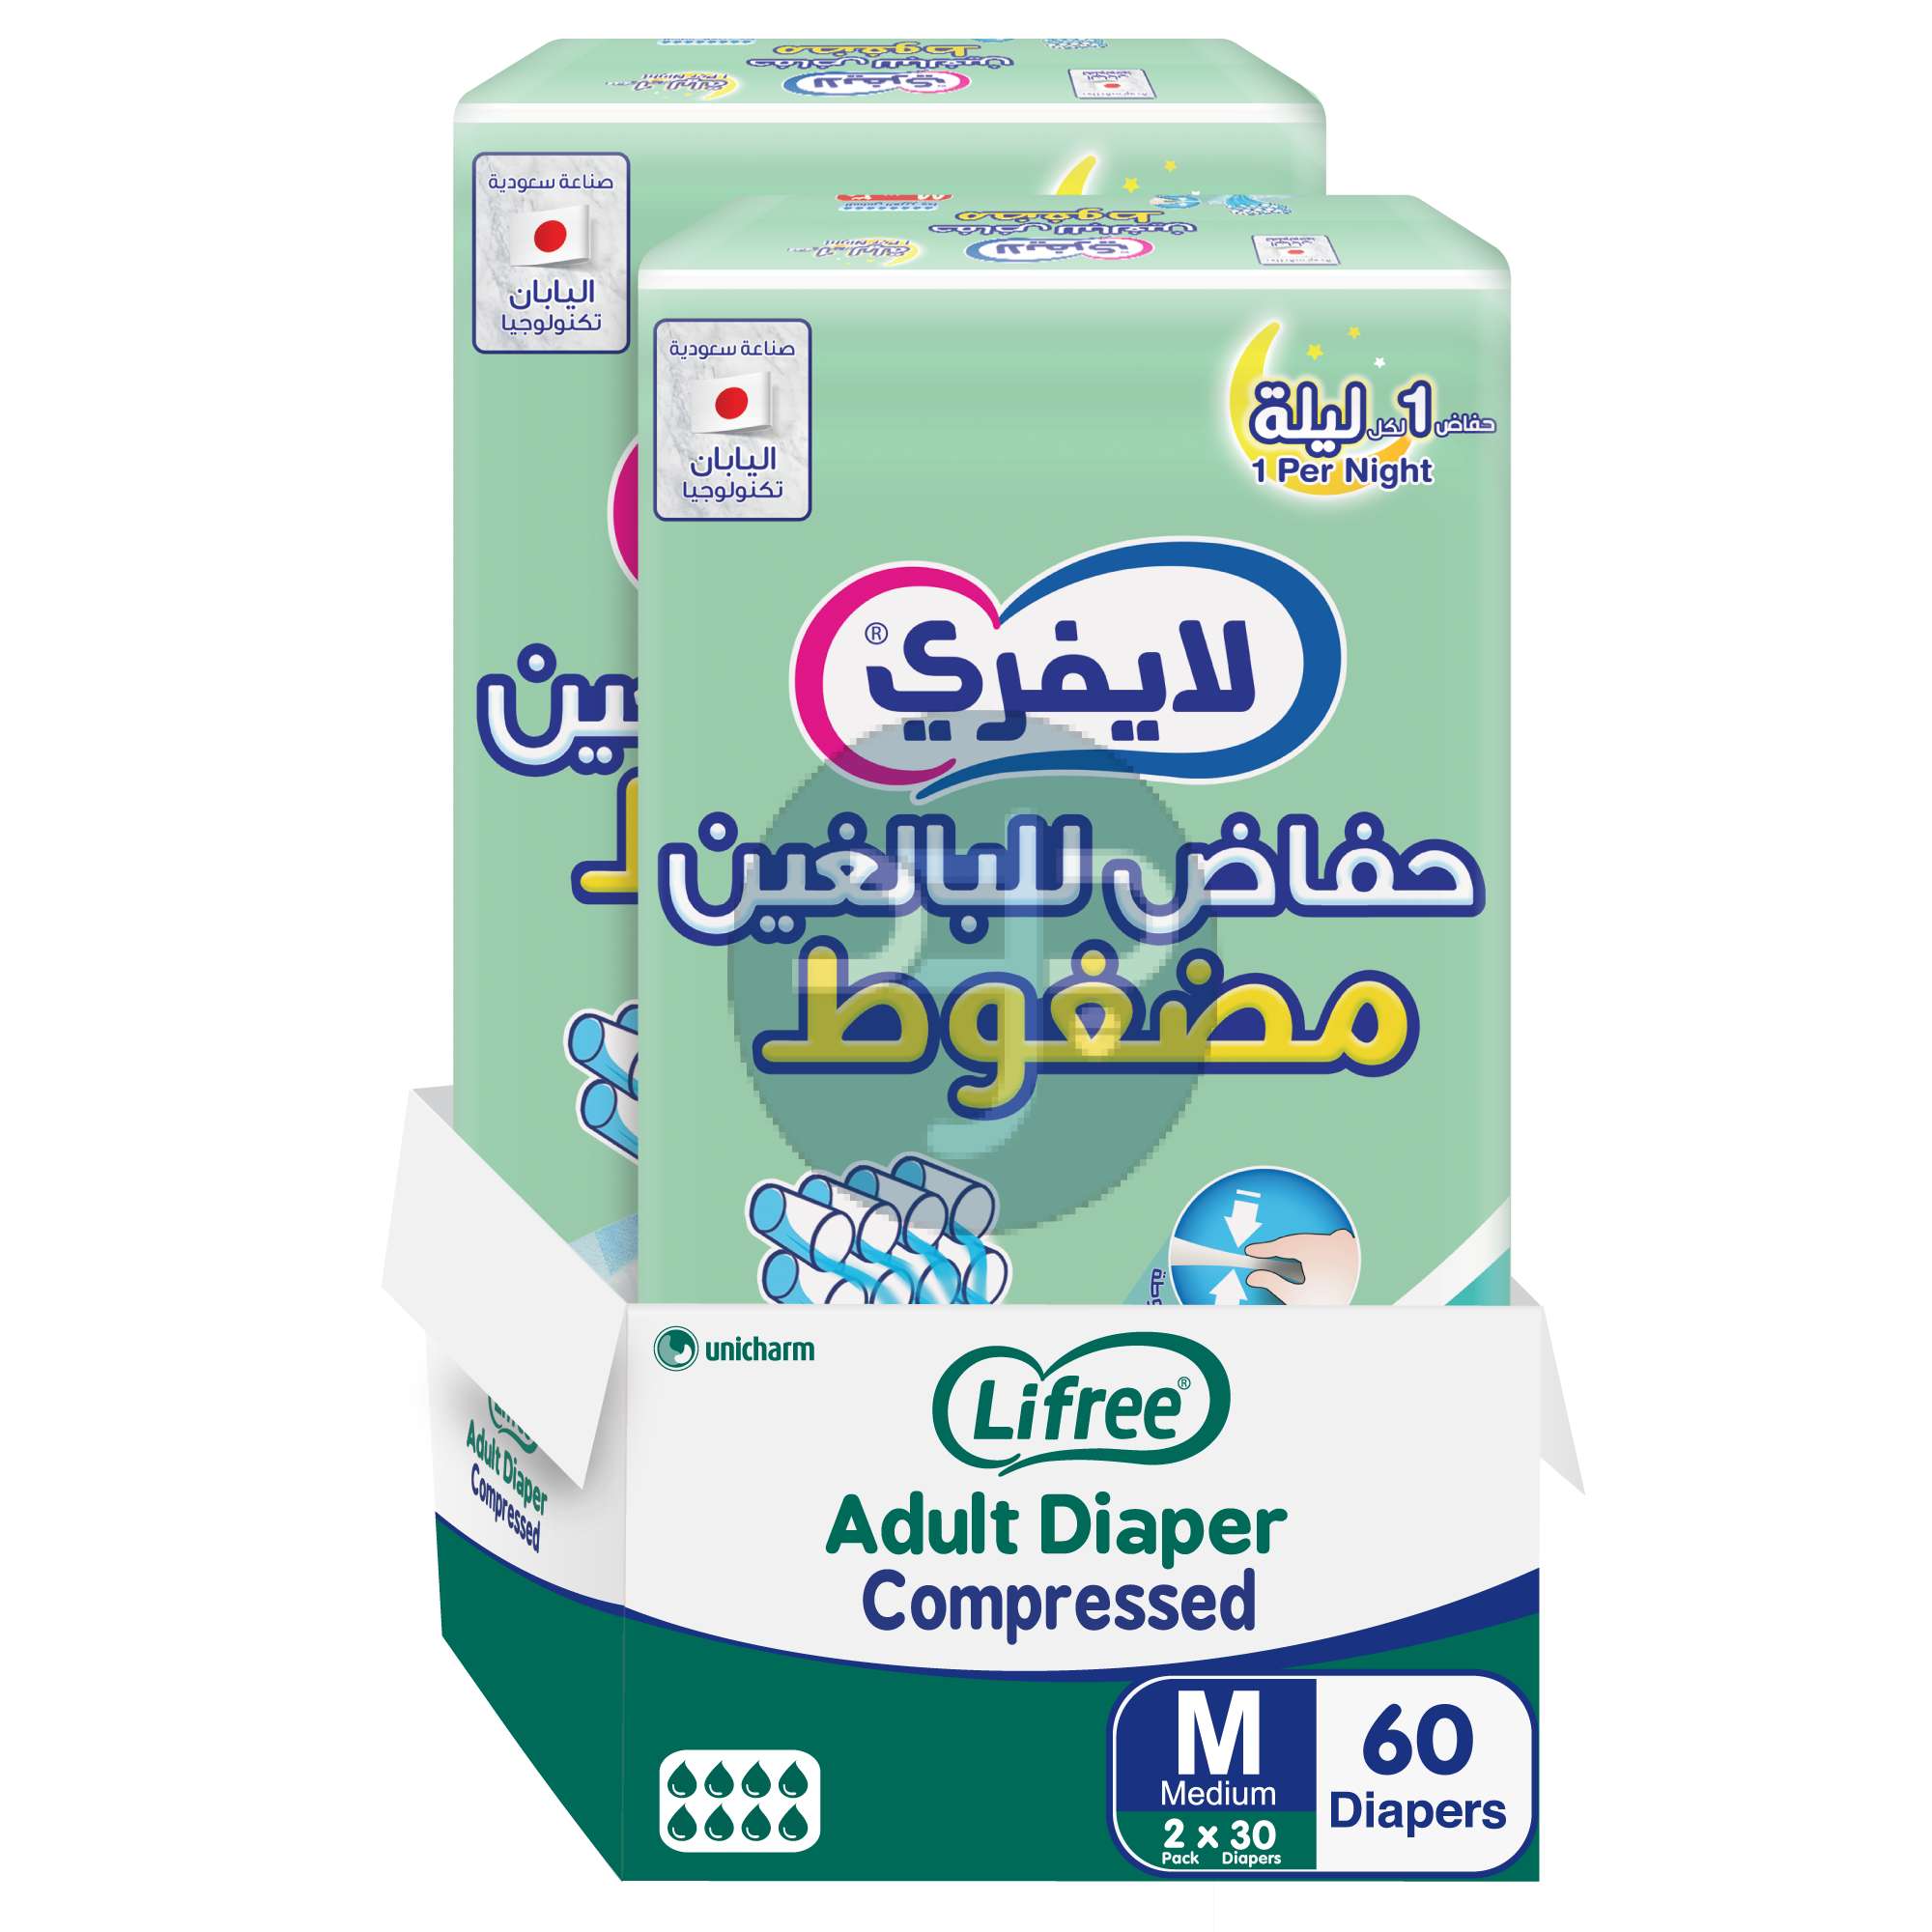 Product-Lifree Compressed Adult Diaper Tape, Medium Size , 8 Cup Absorbency, Jumbo Box, 60 Pieces